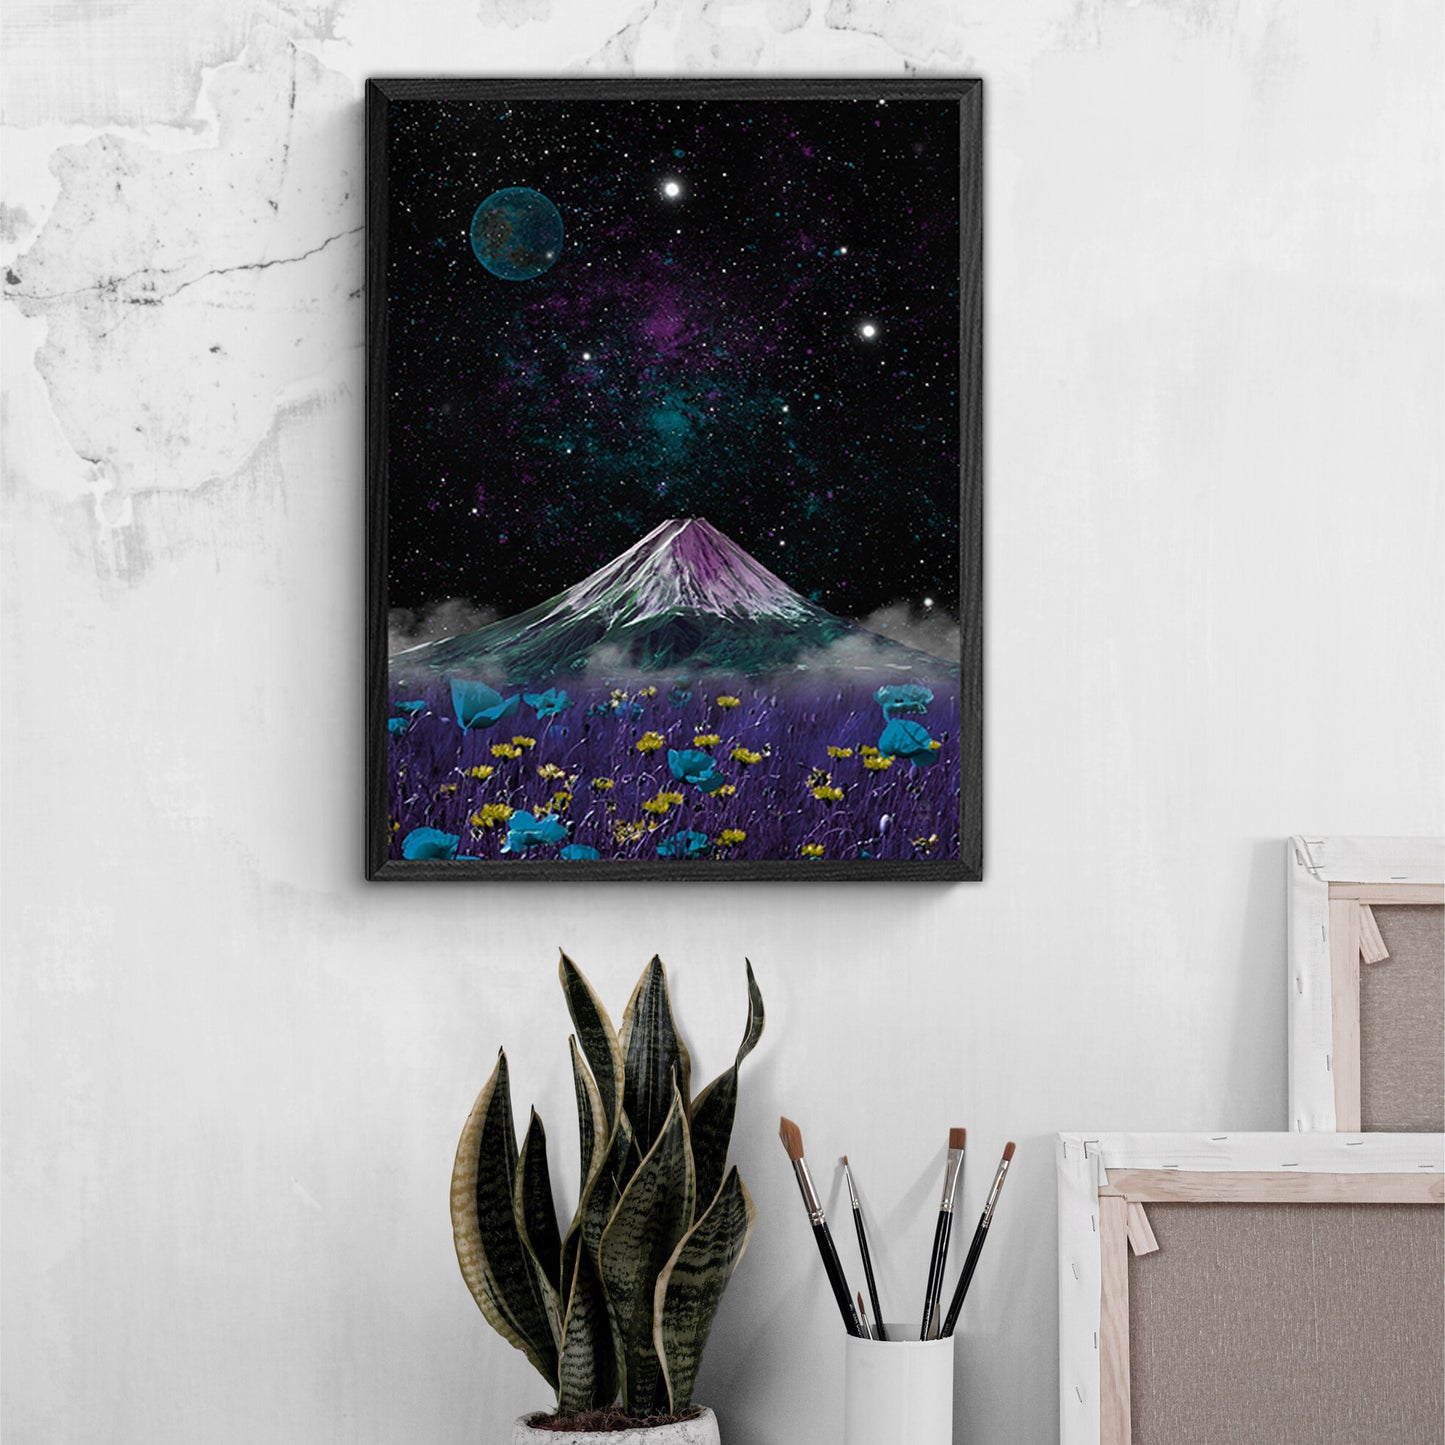 Flower Mountain Bliss Poster Print for space art & collage fans, great gift for home decor and room design